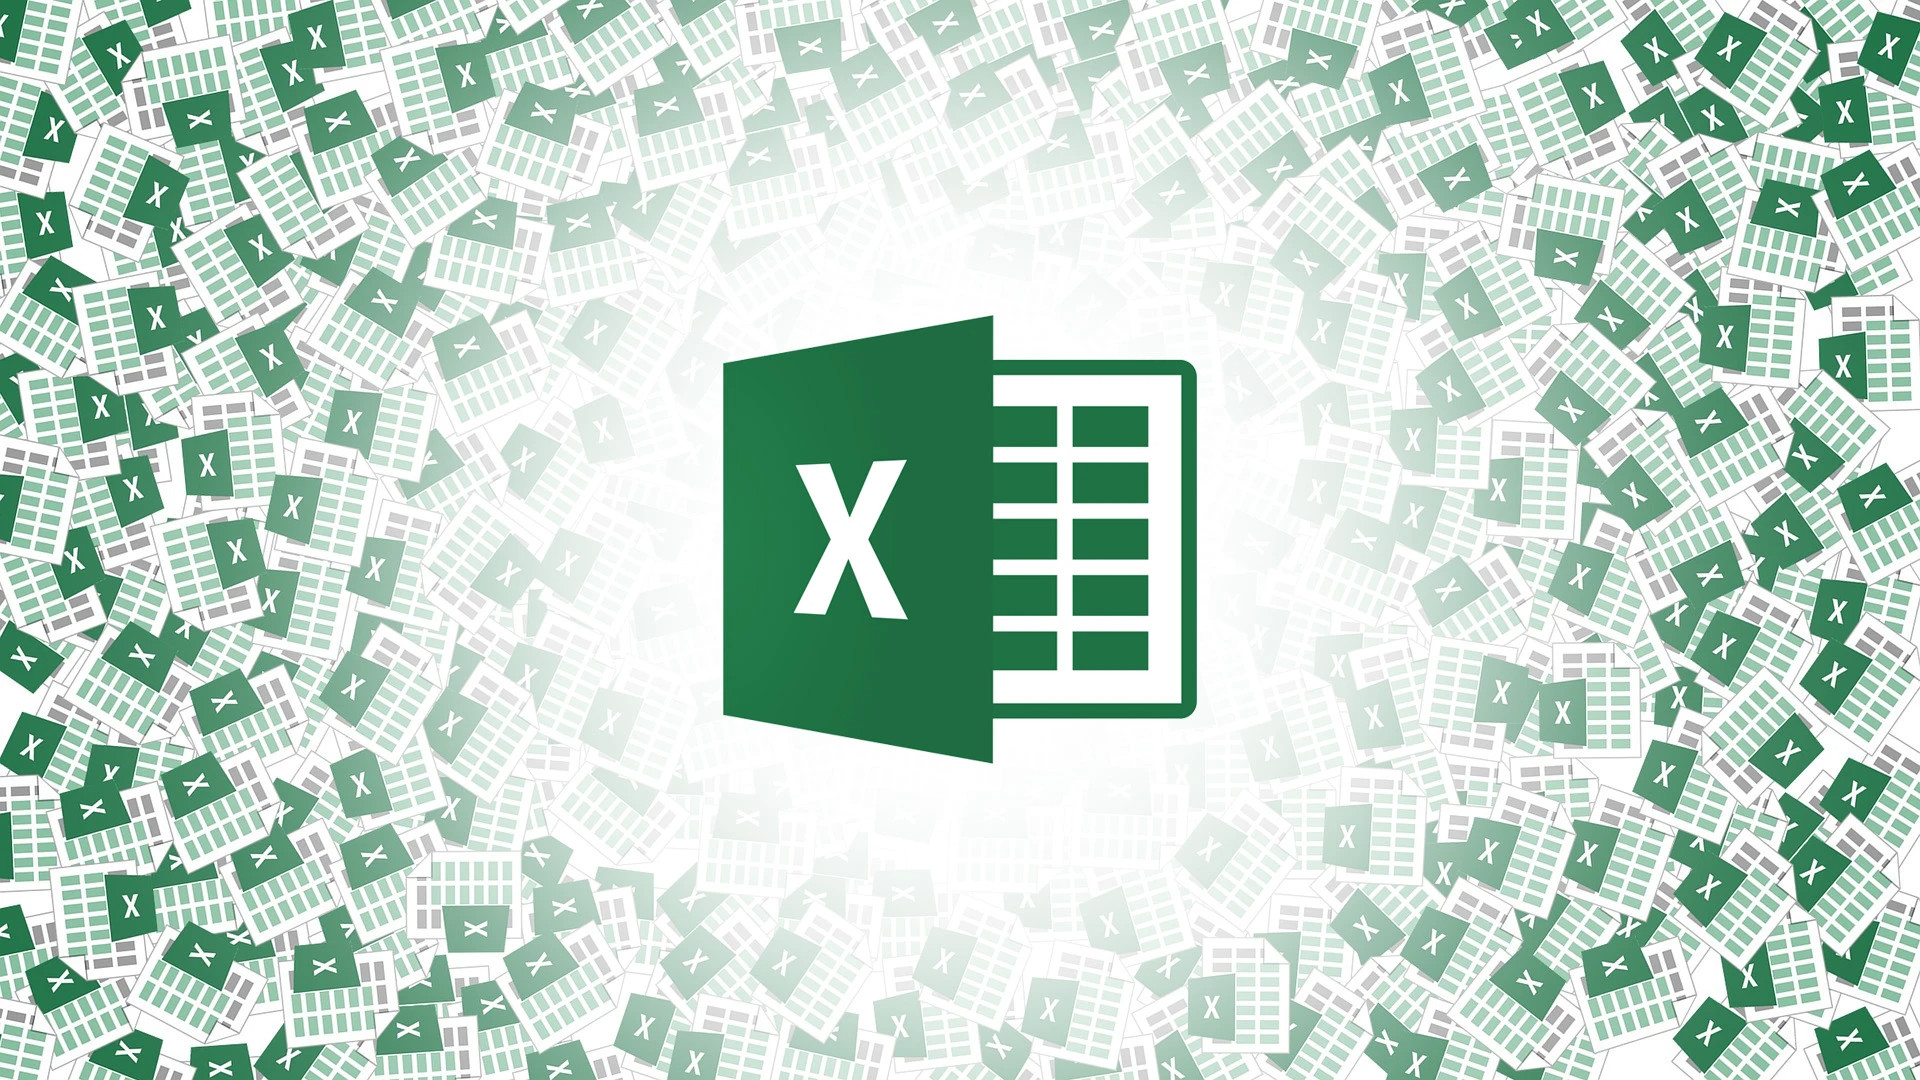 improvement to a very old Excel feature